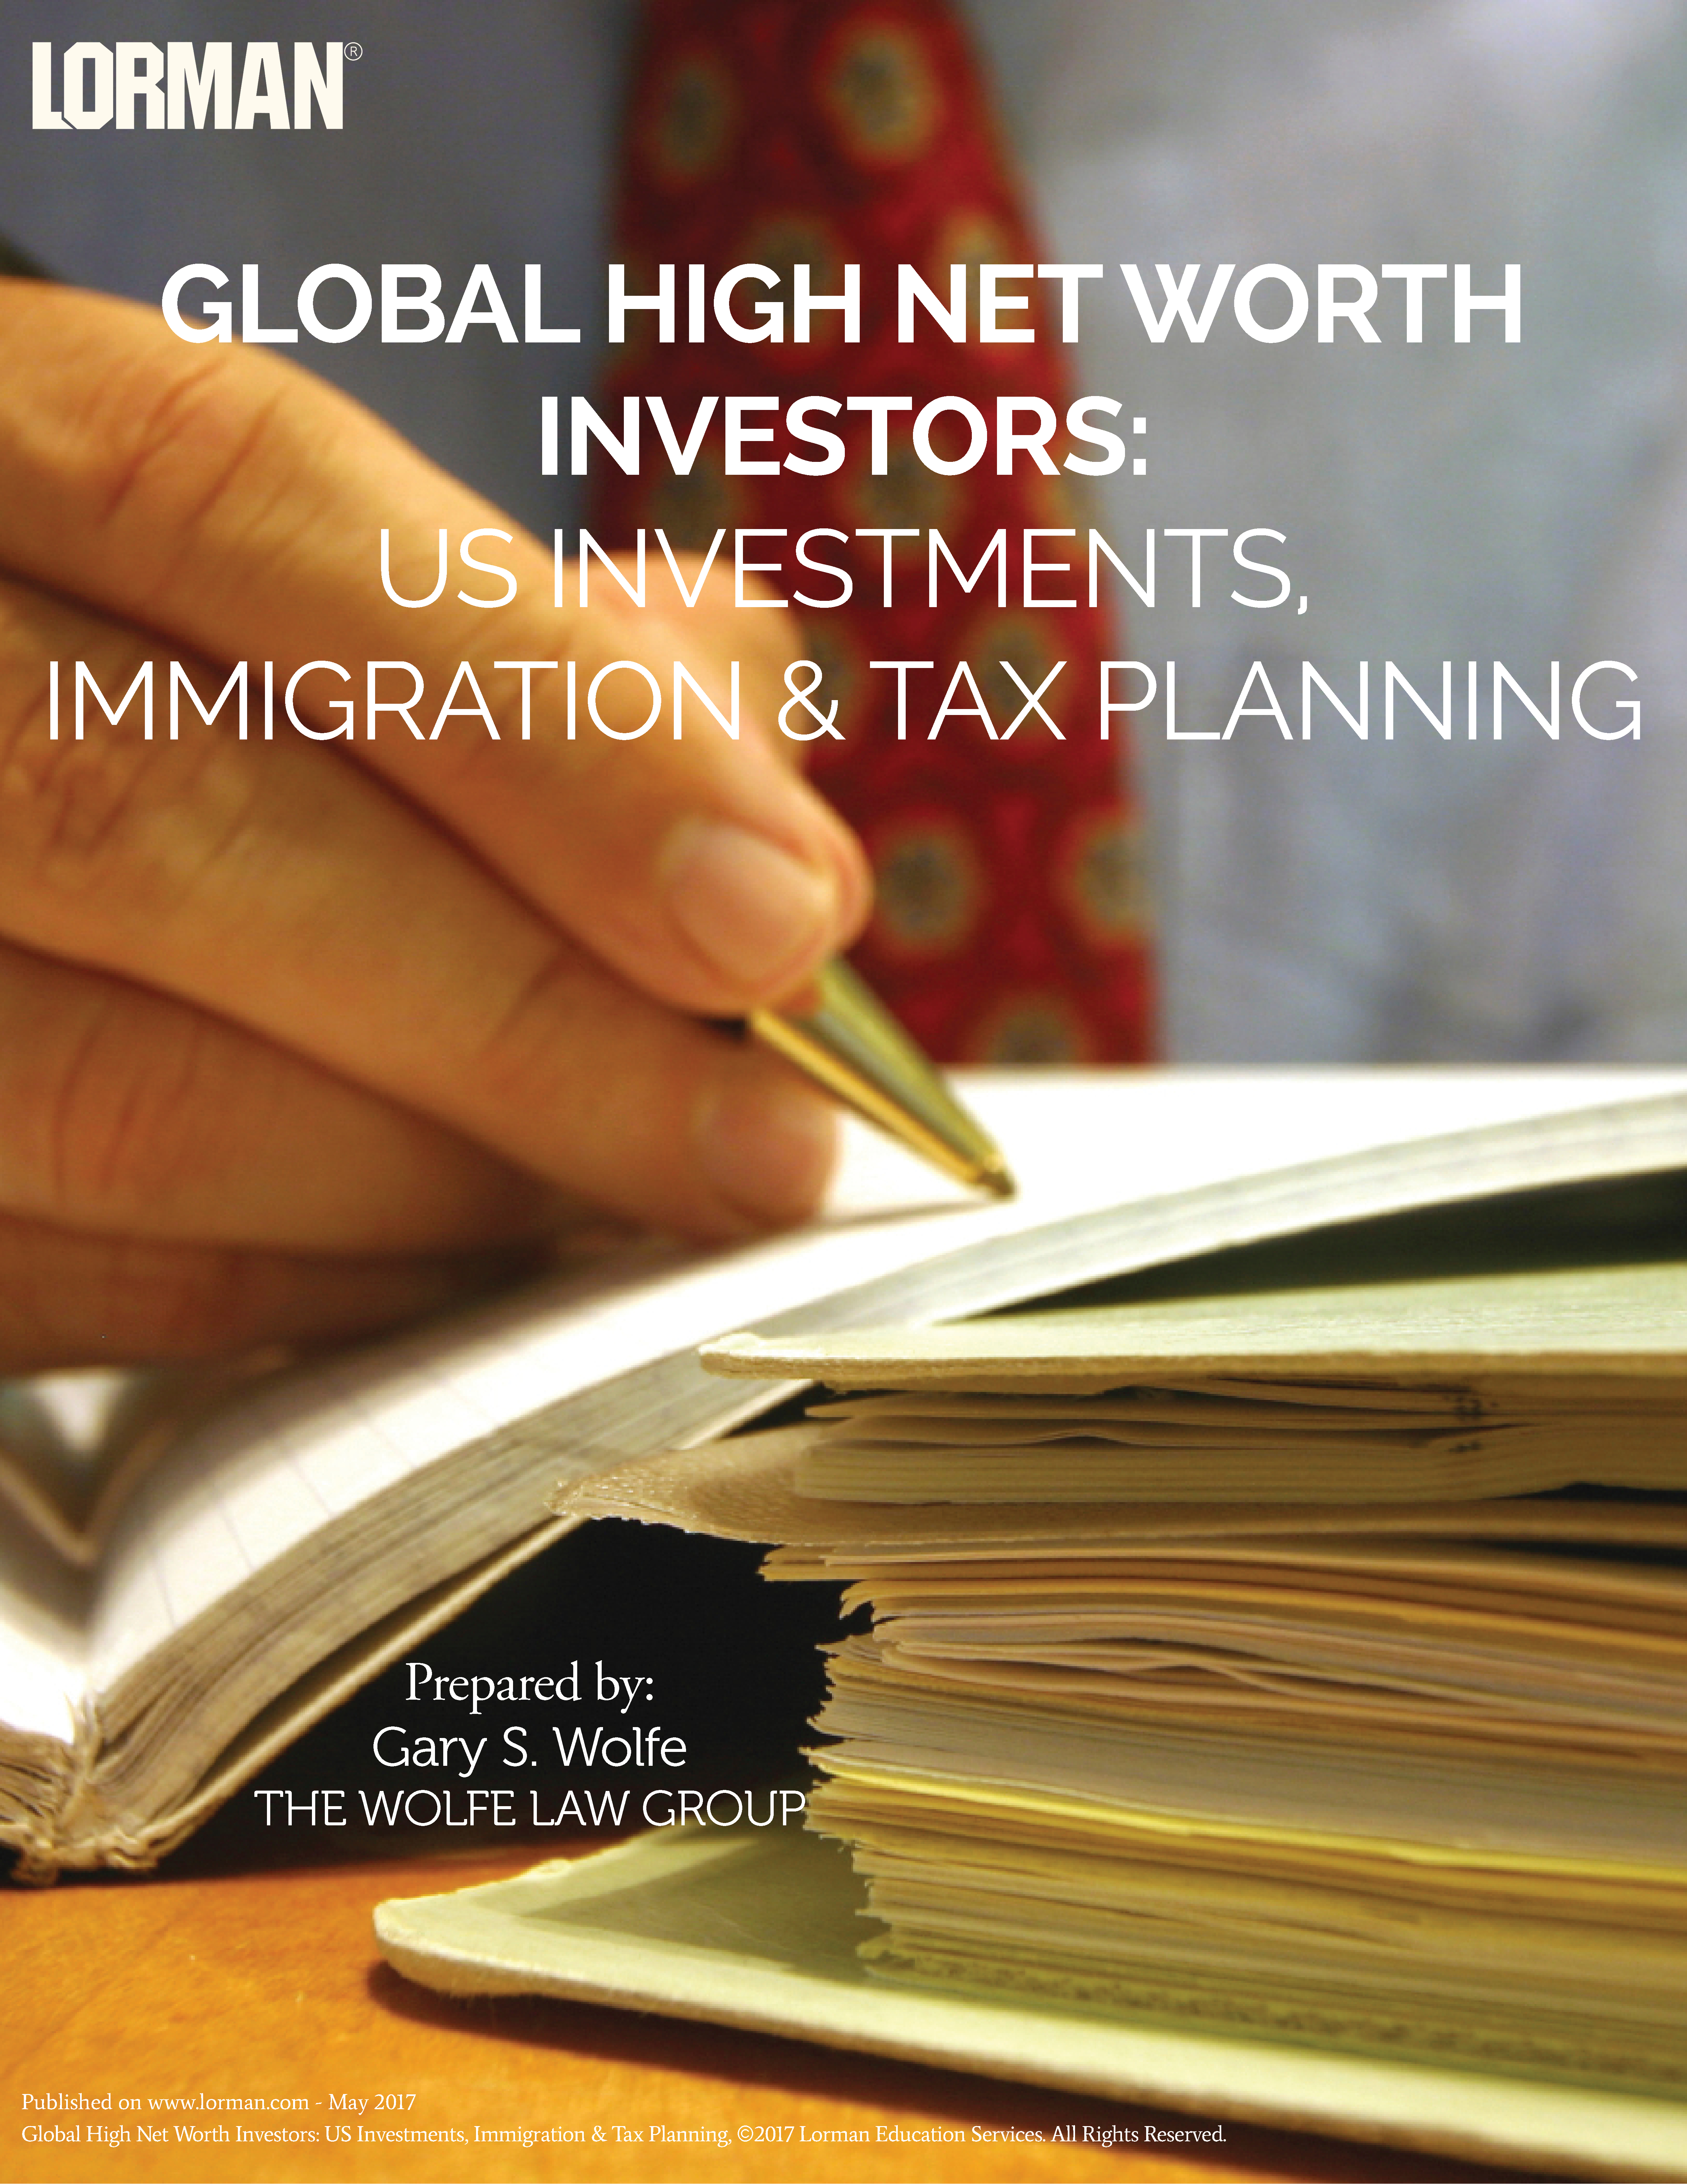 Global High Net Worth Investors: US Investments, Immigration & Tax Planning